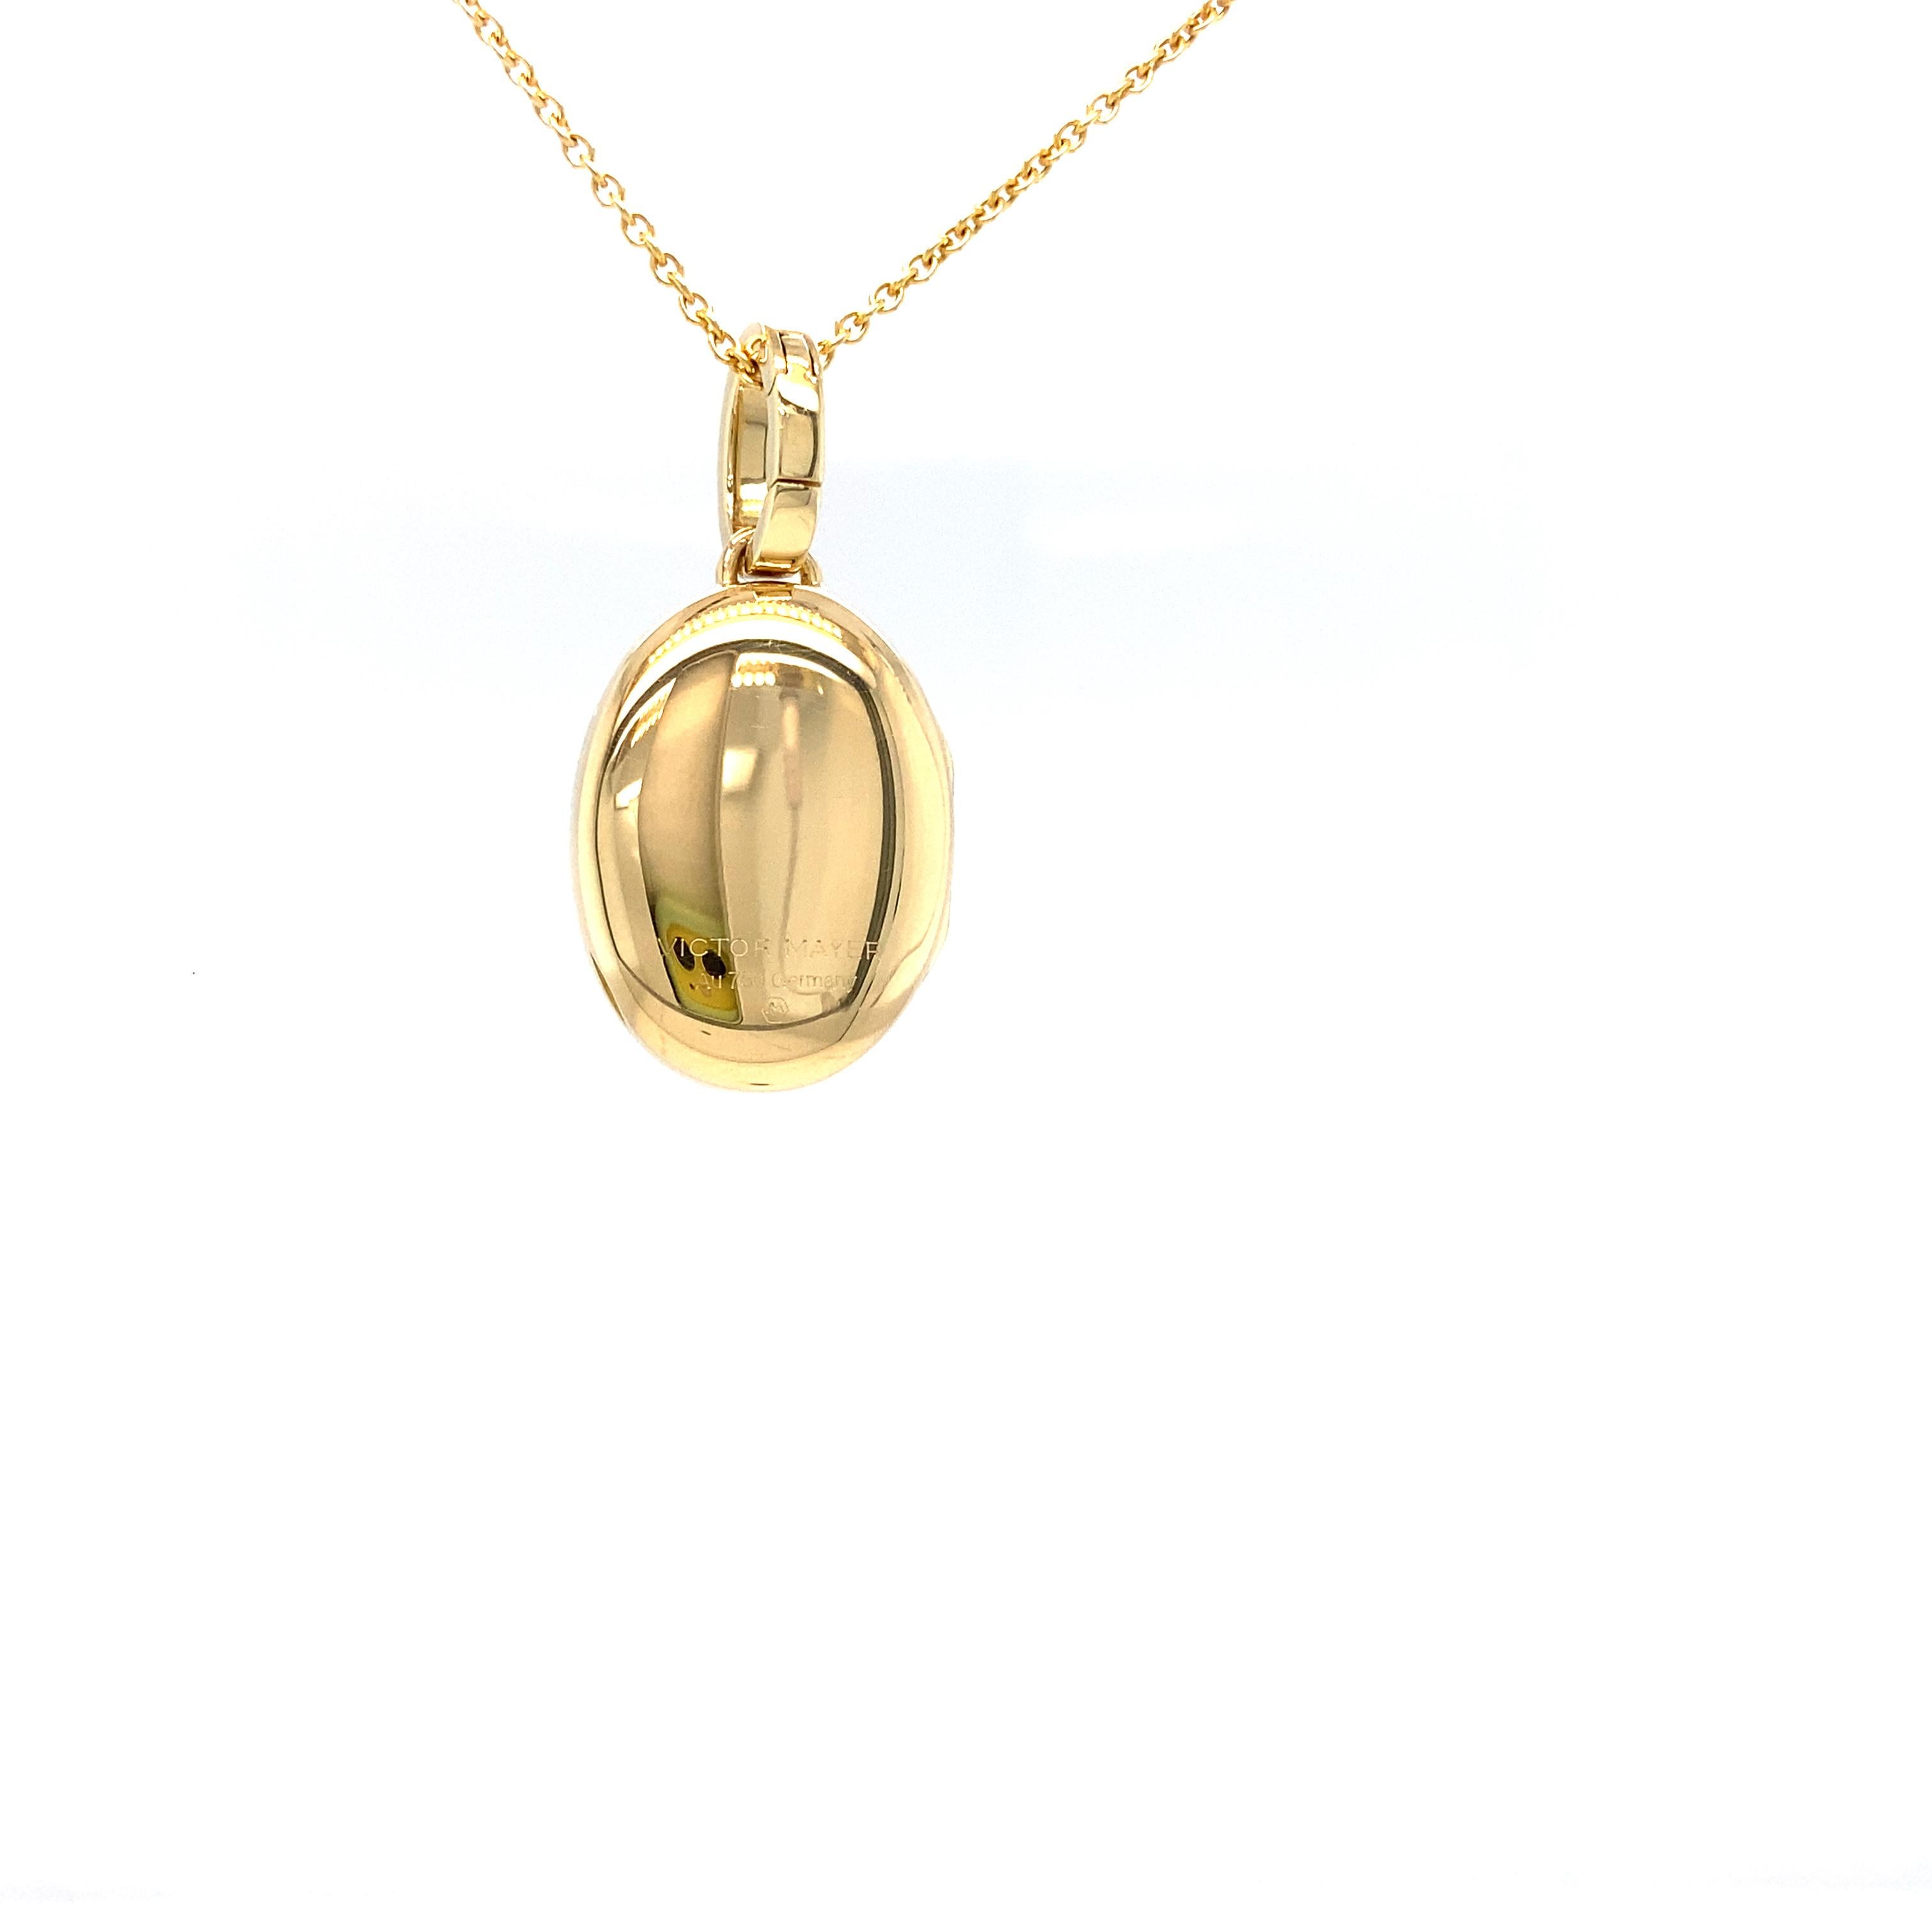 Oval Locket Pendant Necklace Dragonfly 18k Yellow Gold White Guilloche Enamel In New Condition For Sale In Pforzheim, DE